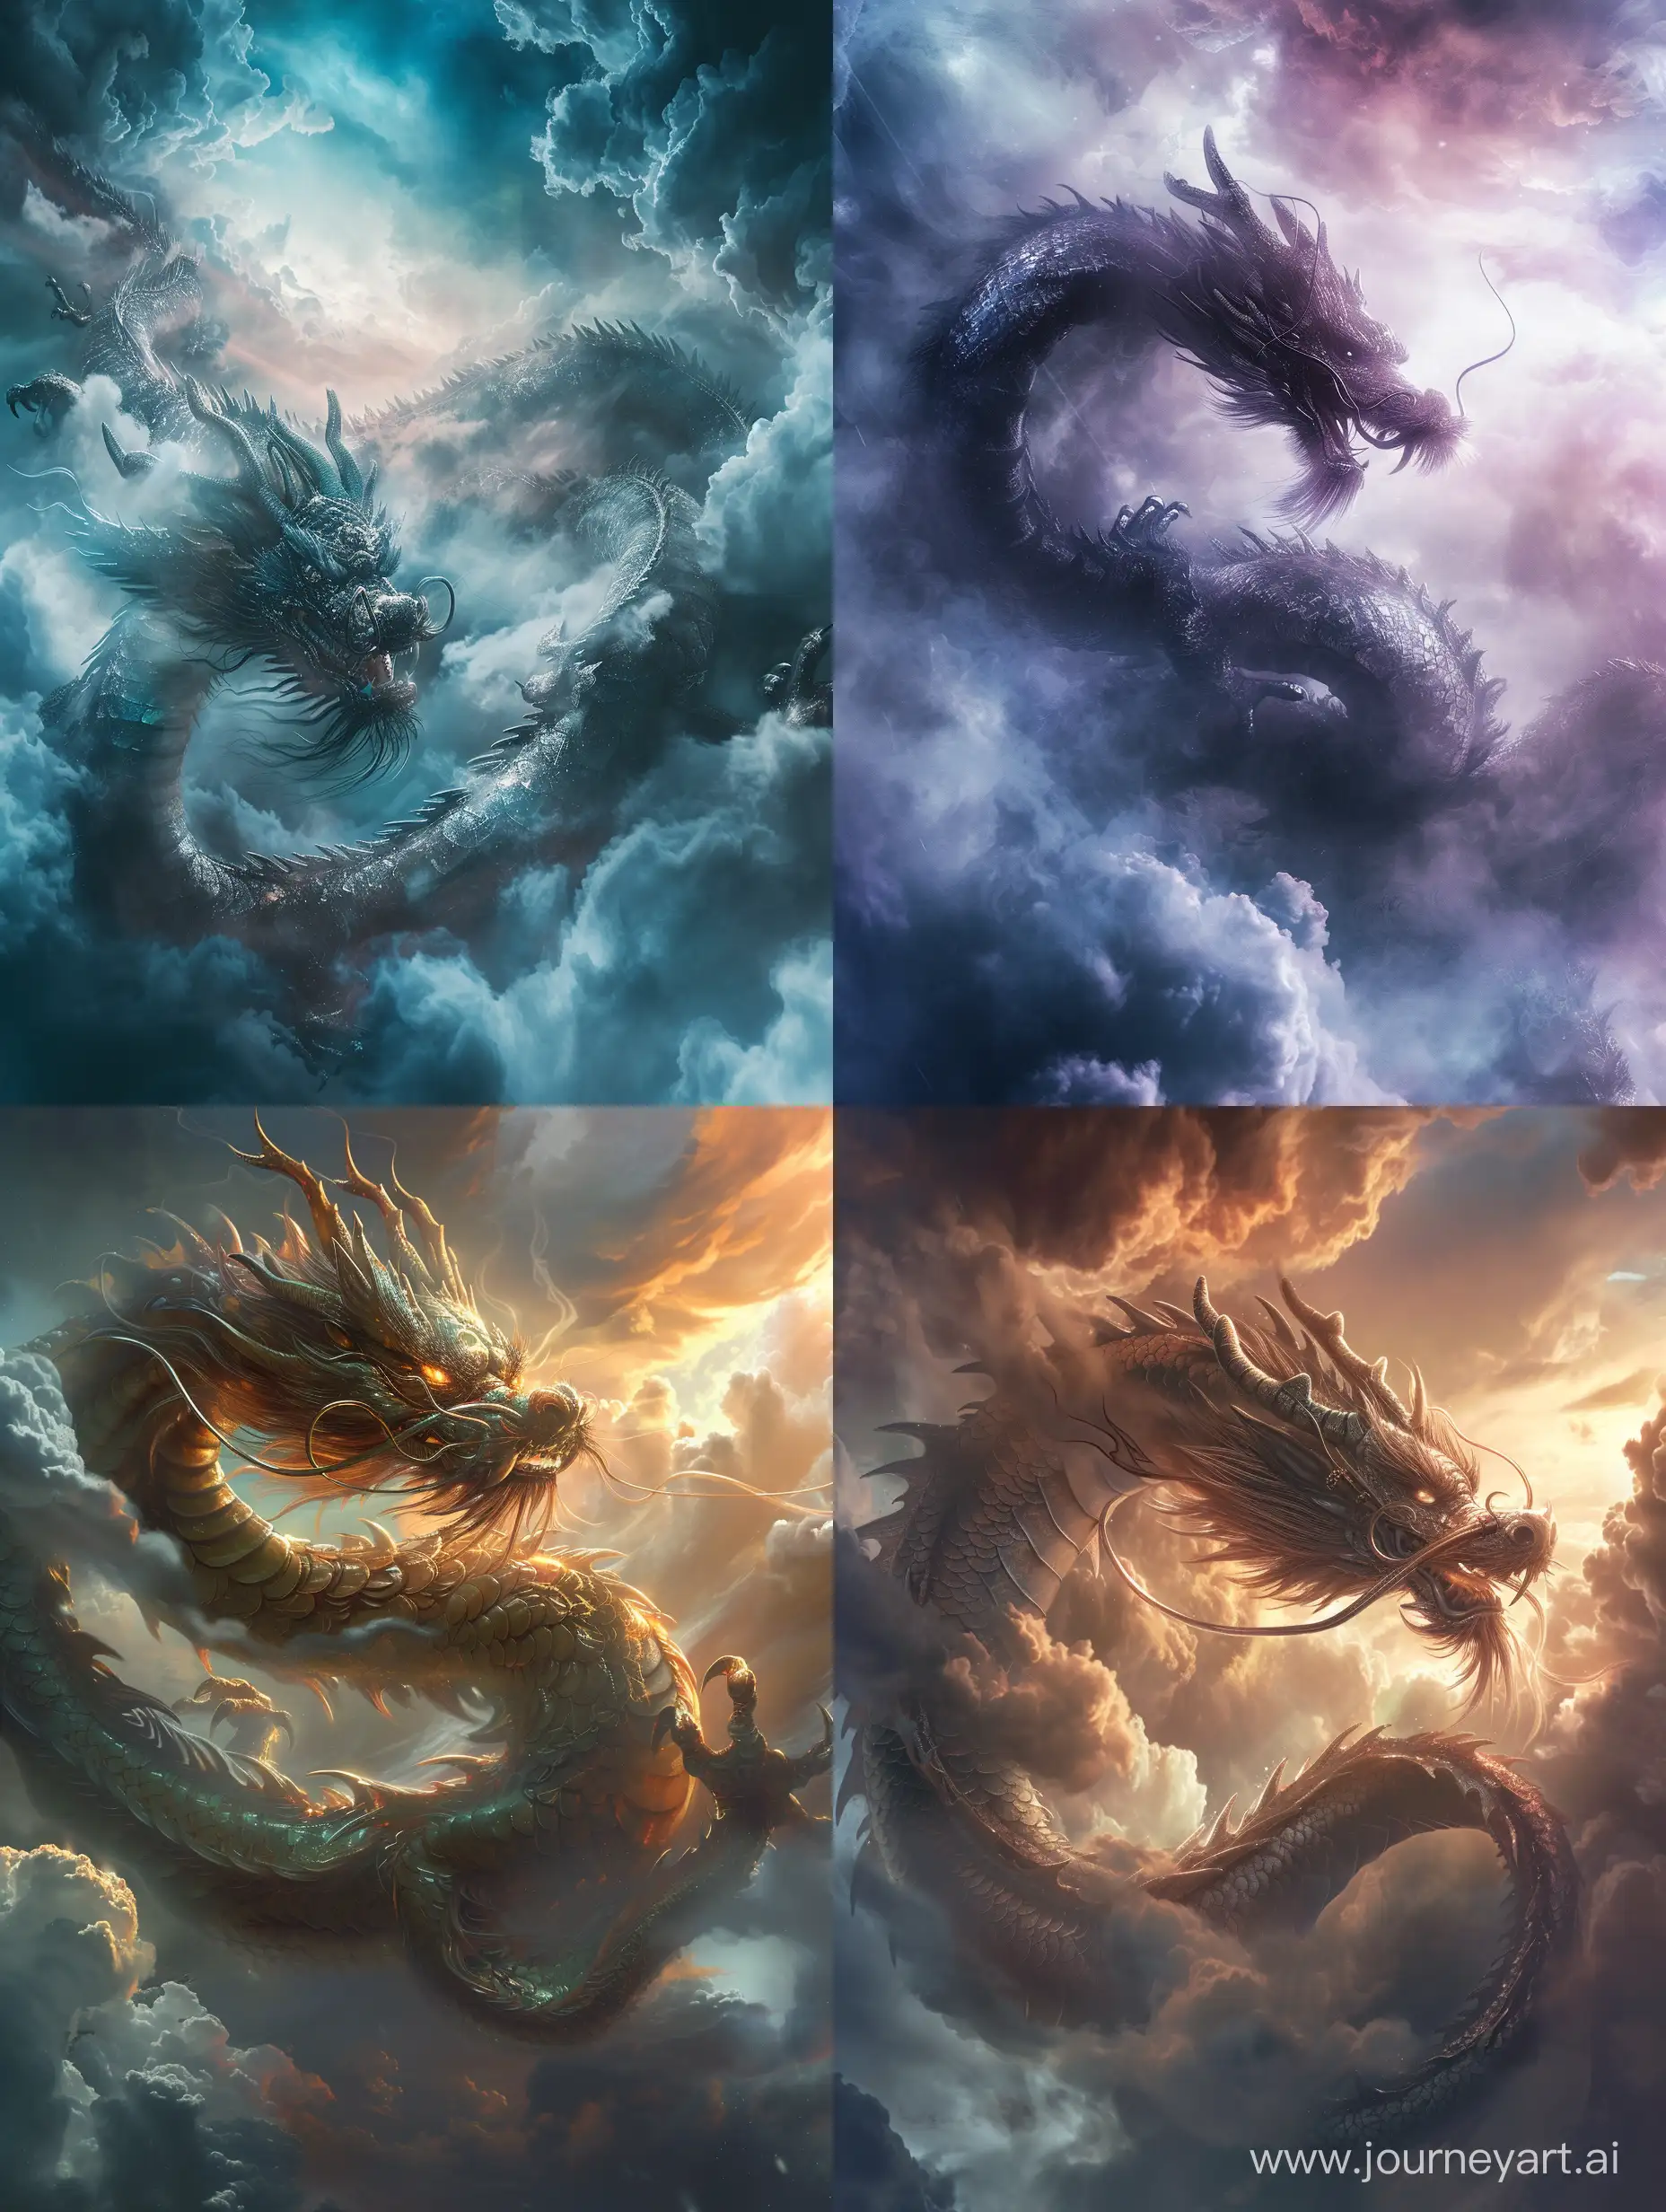 Cyberpunk-Chinese-Dragon-Emerging-from-PlatinumColored-Clouds